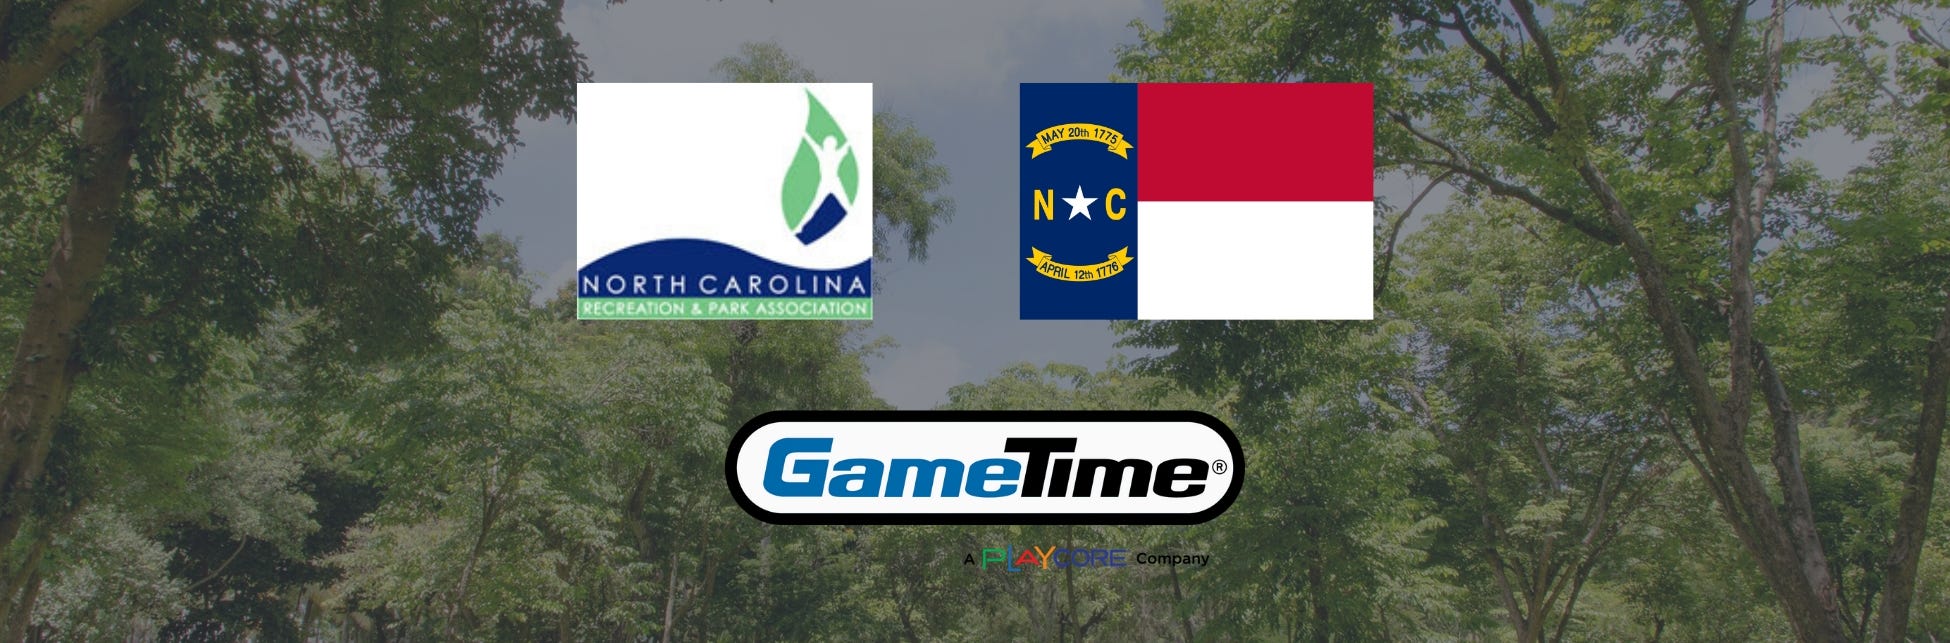 GameTime Partners with North Carolina Recreation and Parks Association